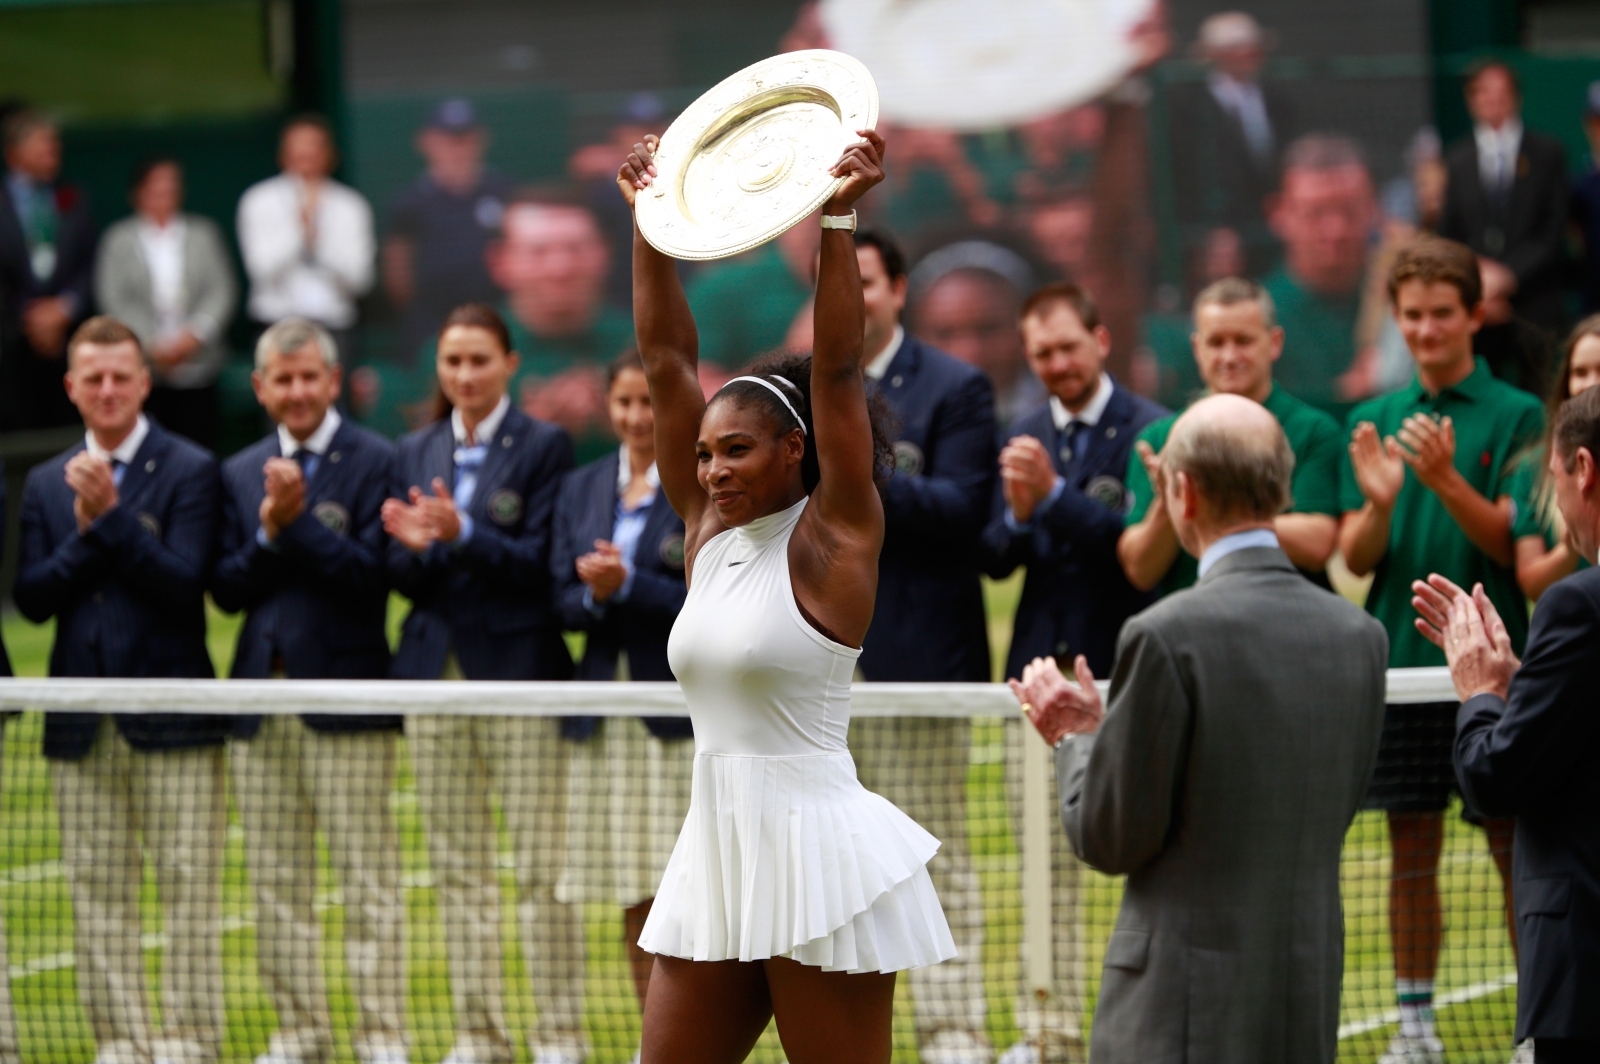 Wimbledon 2016: Serena Williams beats Angelique Kerber to seal 7th title and equal ...1600 x 1064